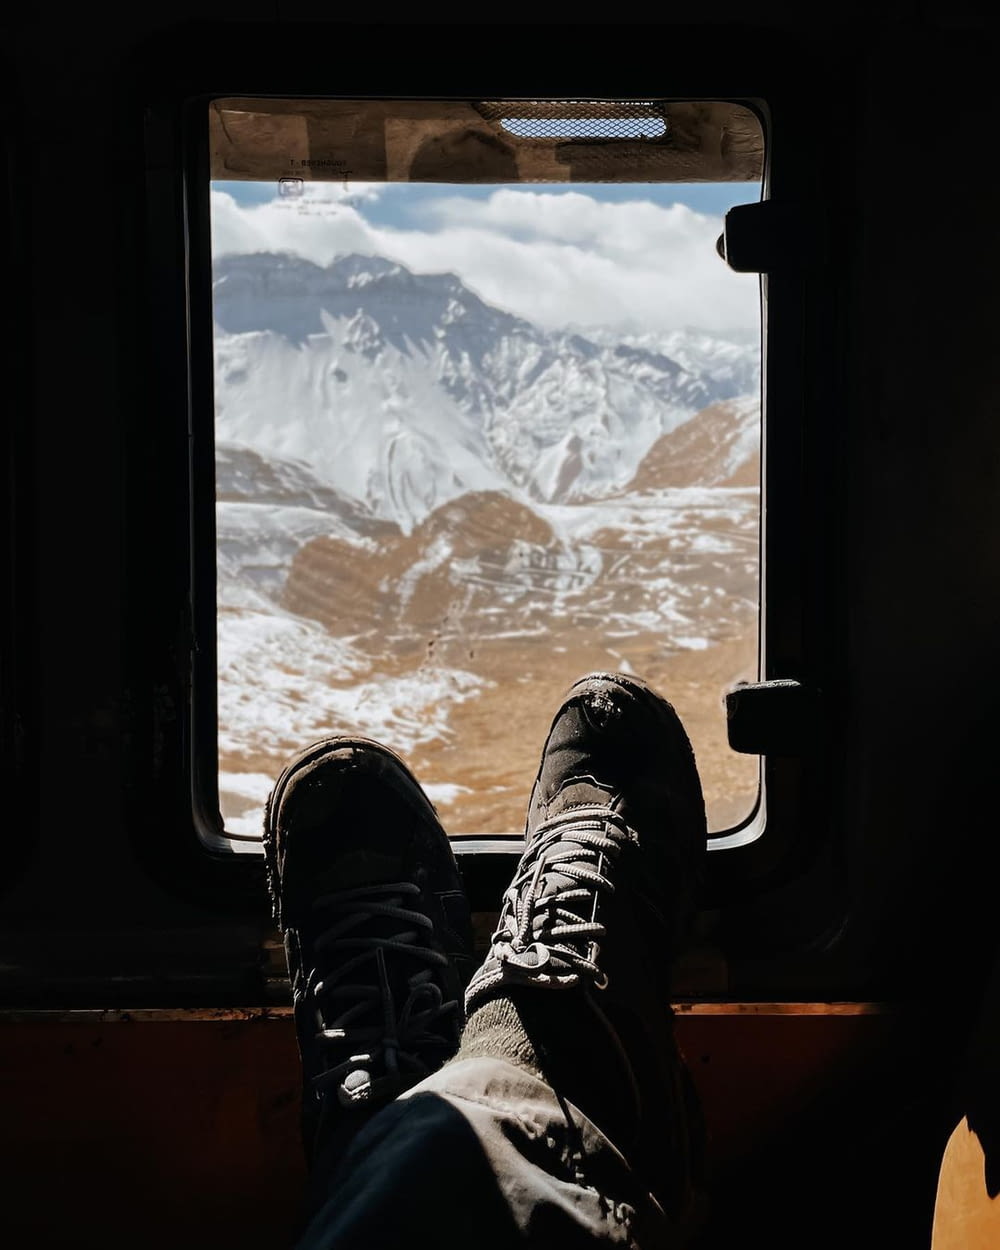 a person's feet on a window sill looking out at a snowy mountain range